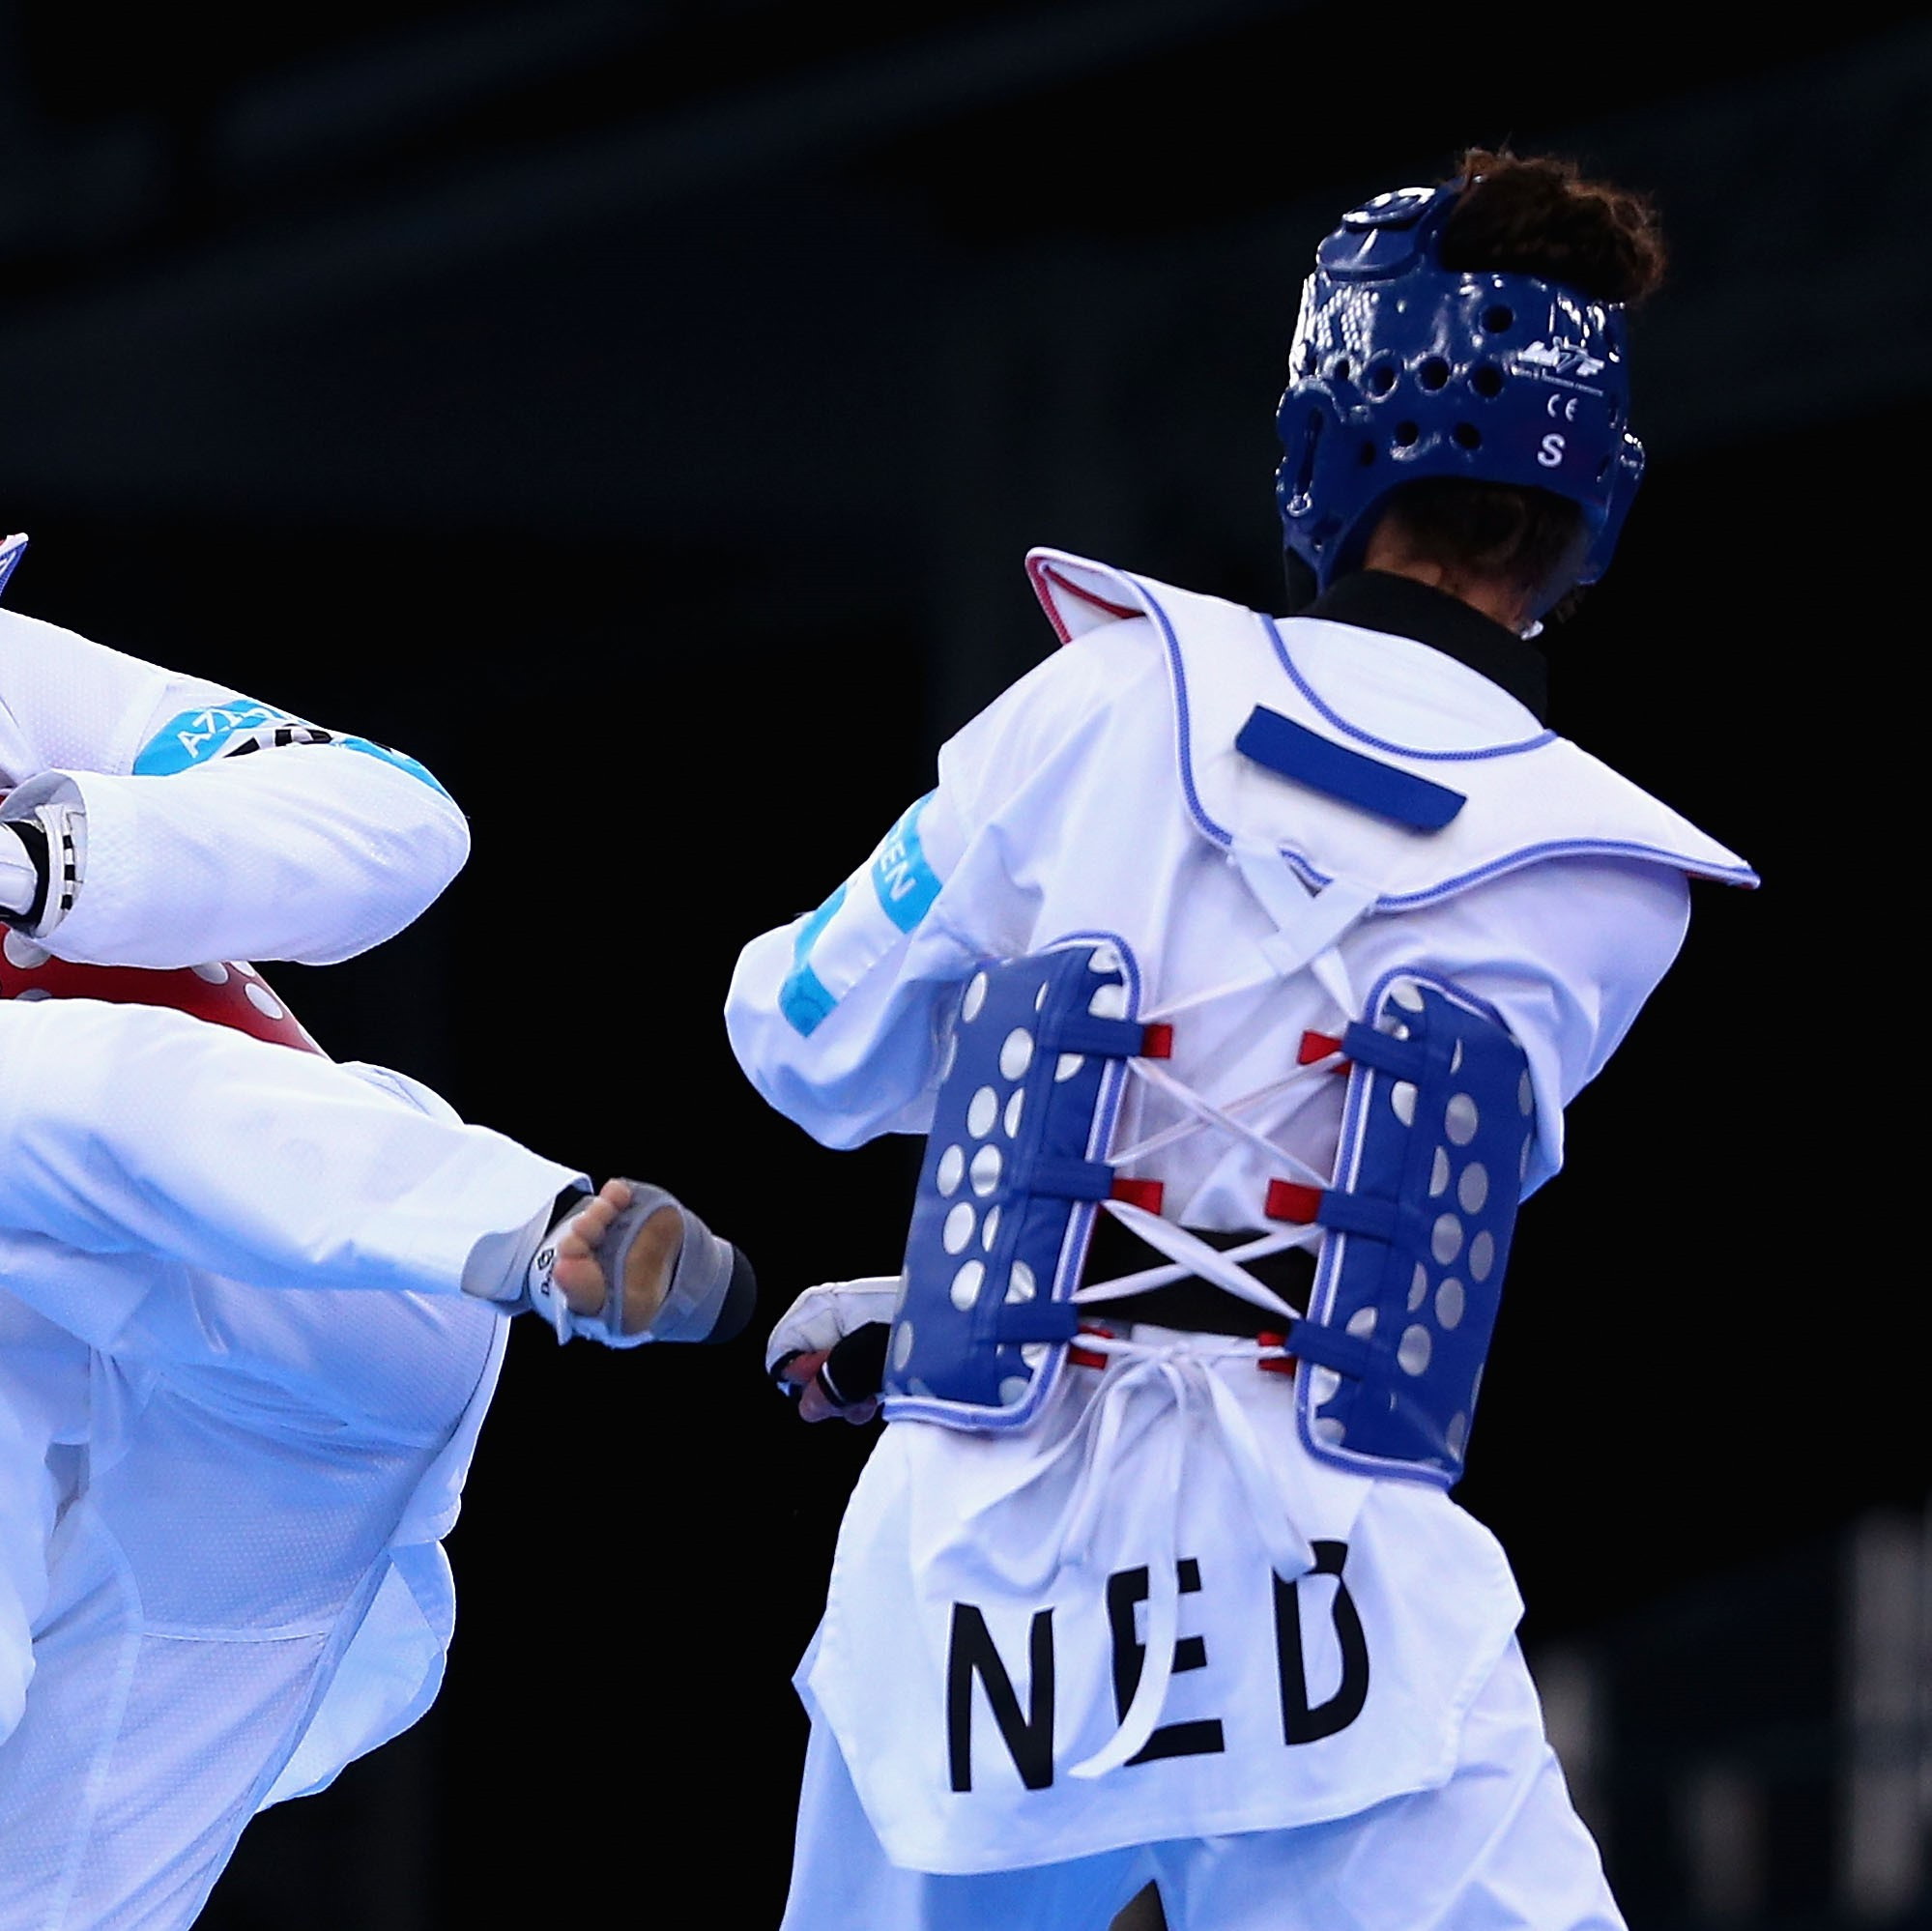 Taekwondo Federation Netherlands is to follow an inclusion and diversity charter ©Getty Images